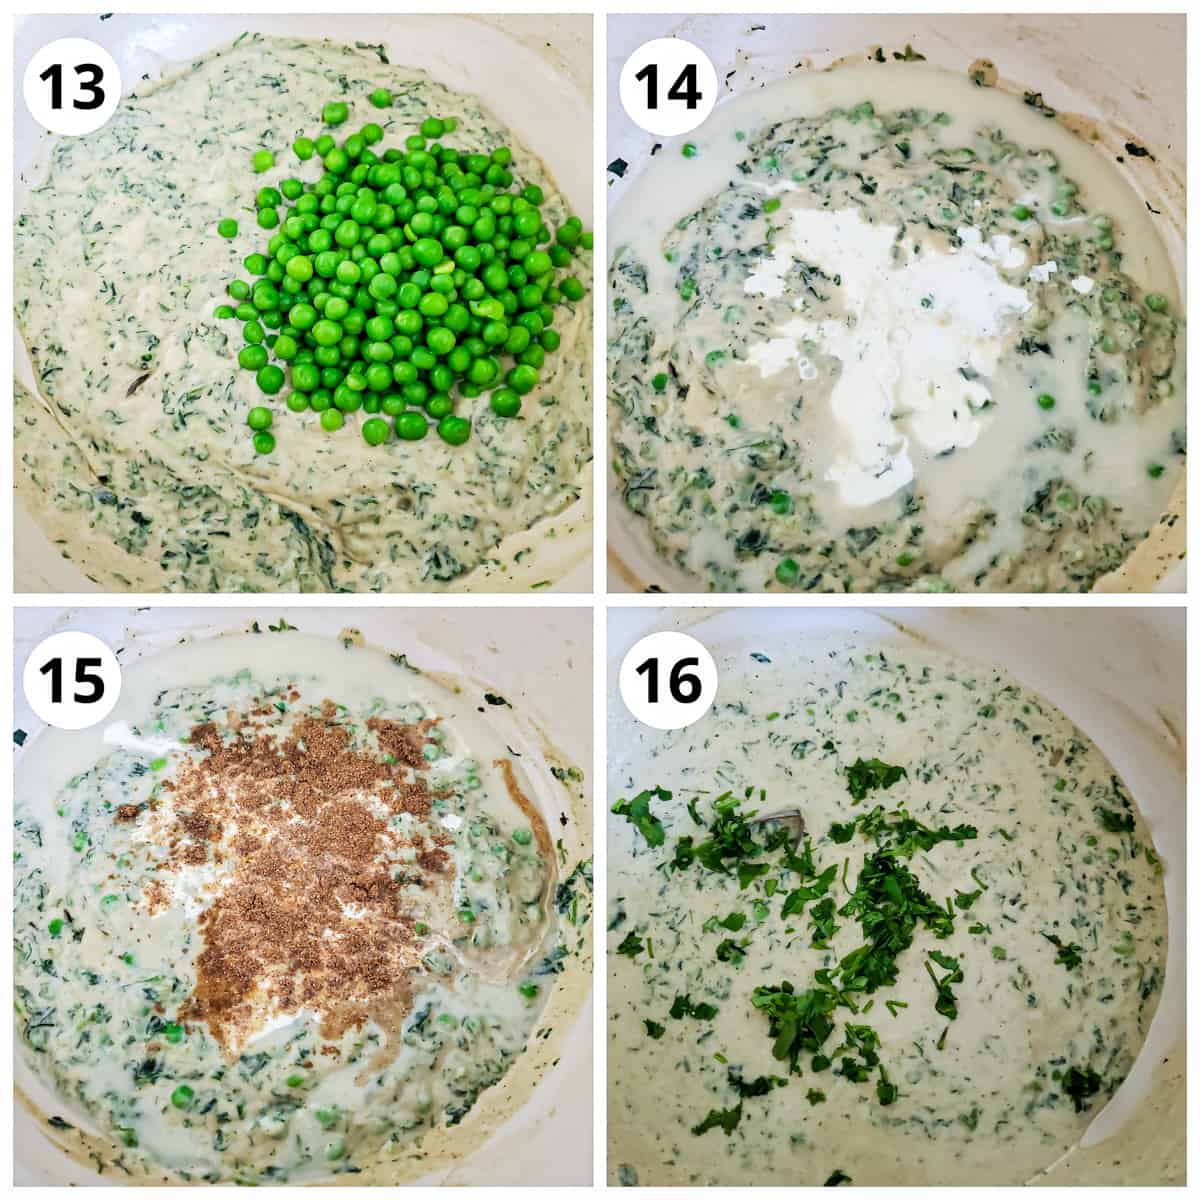 Steps for cooking green peas, cream, garam masala and finishing with cilantro